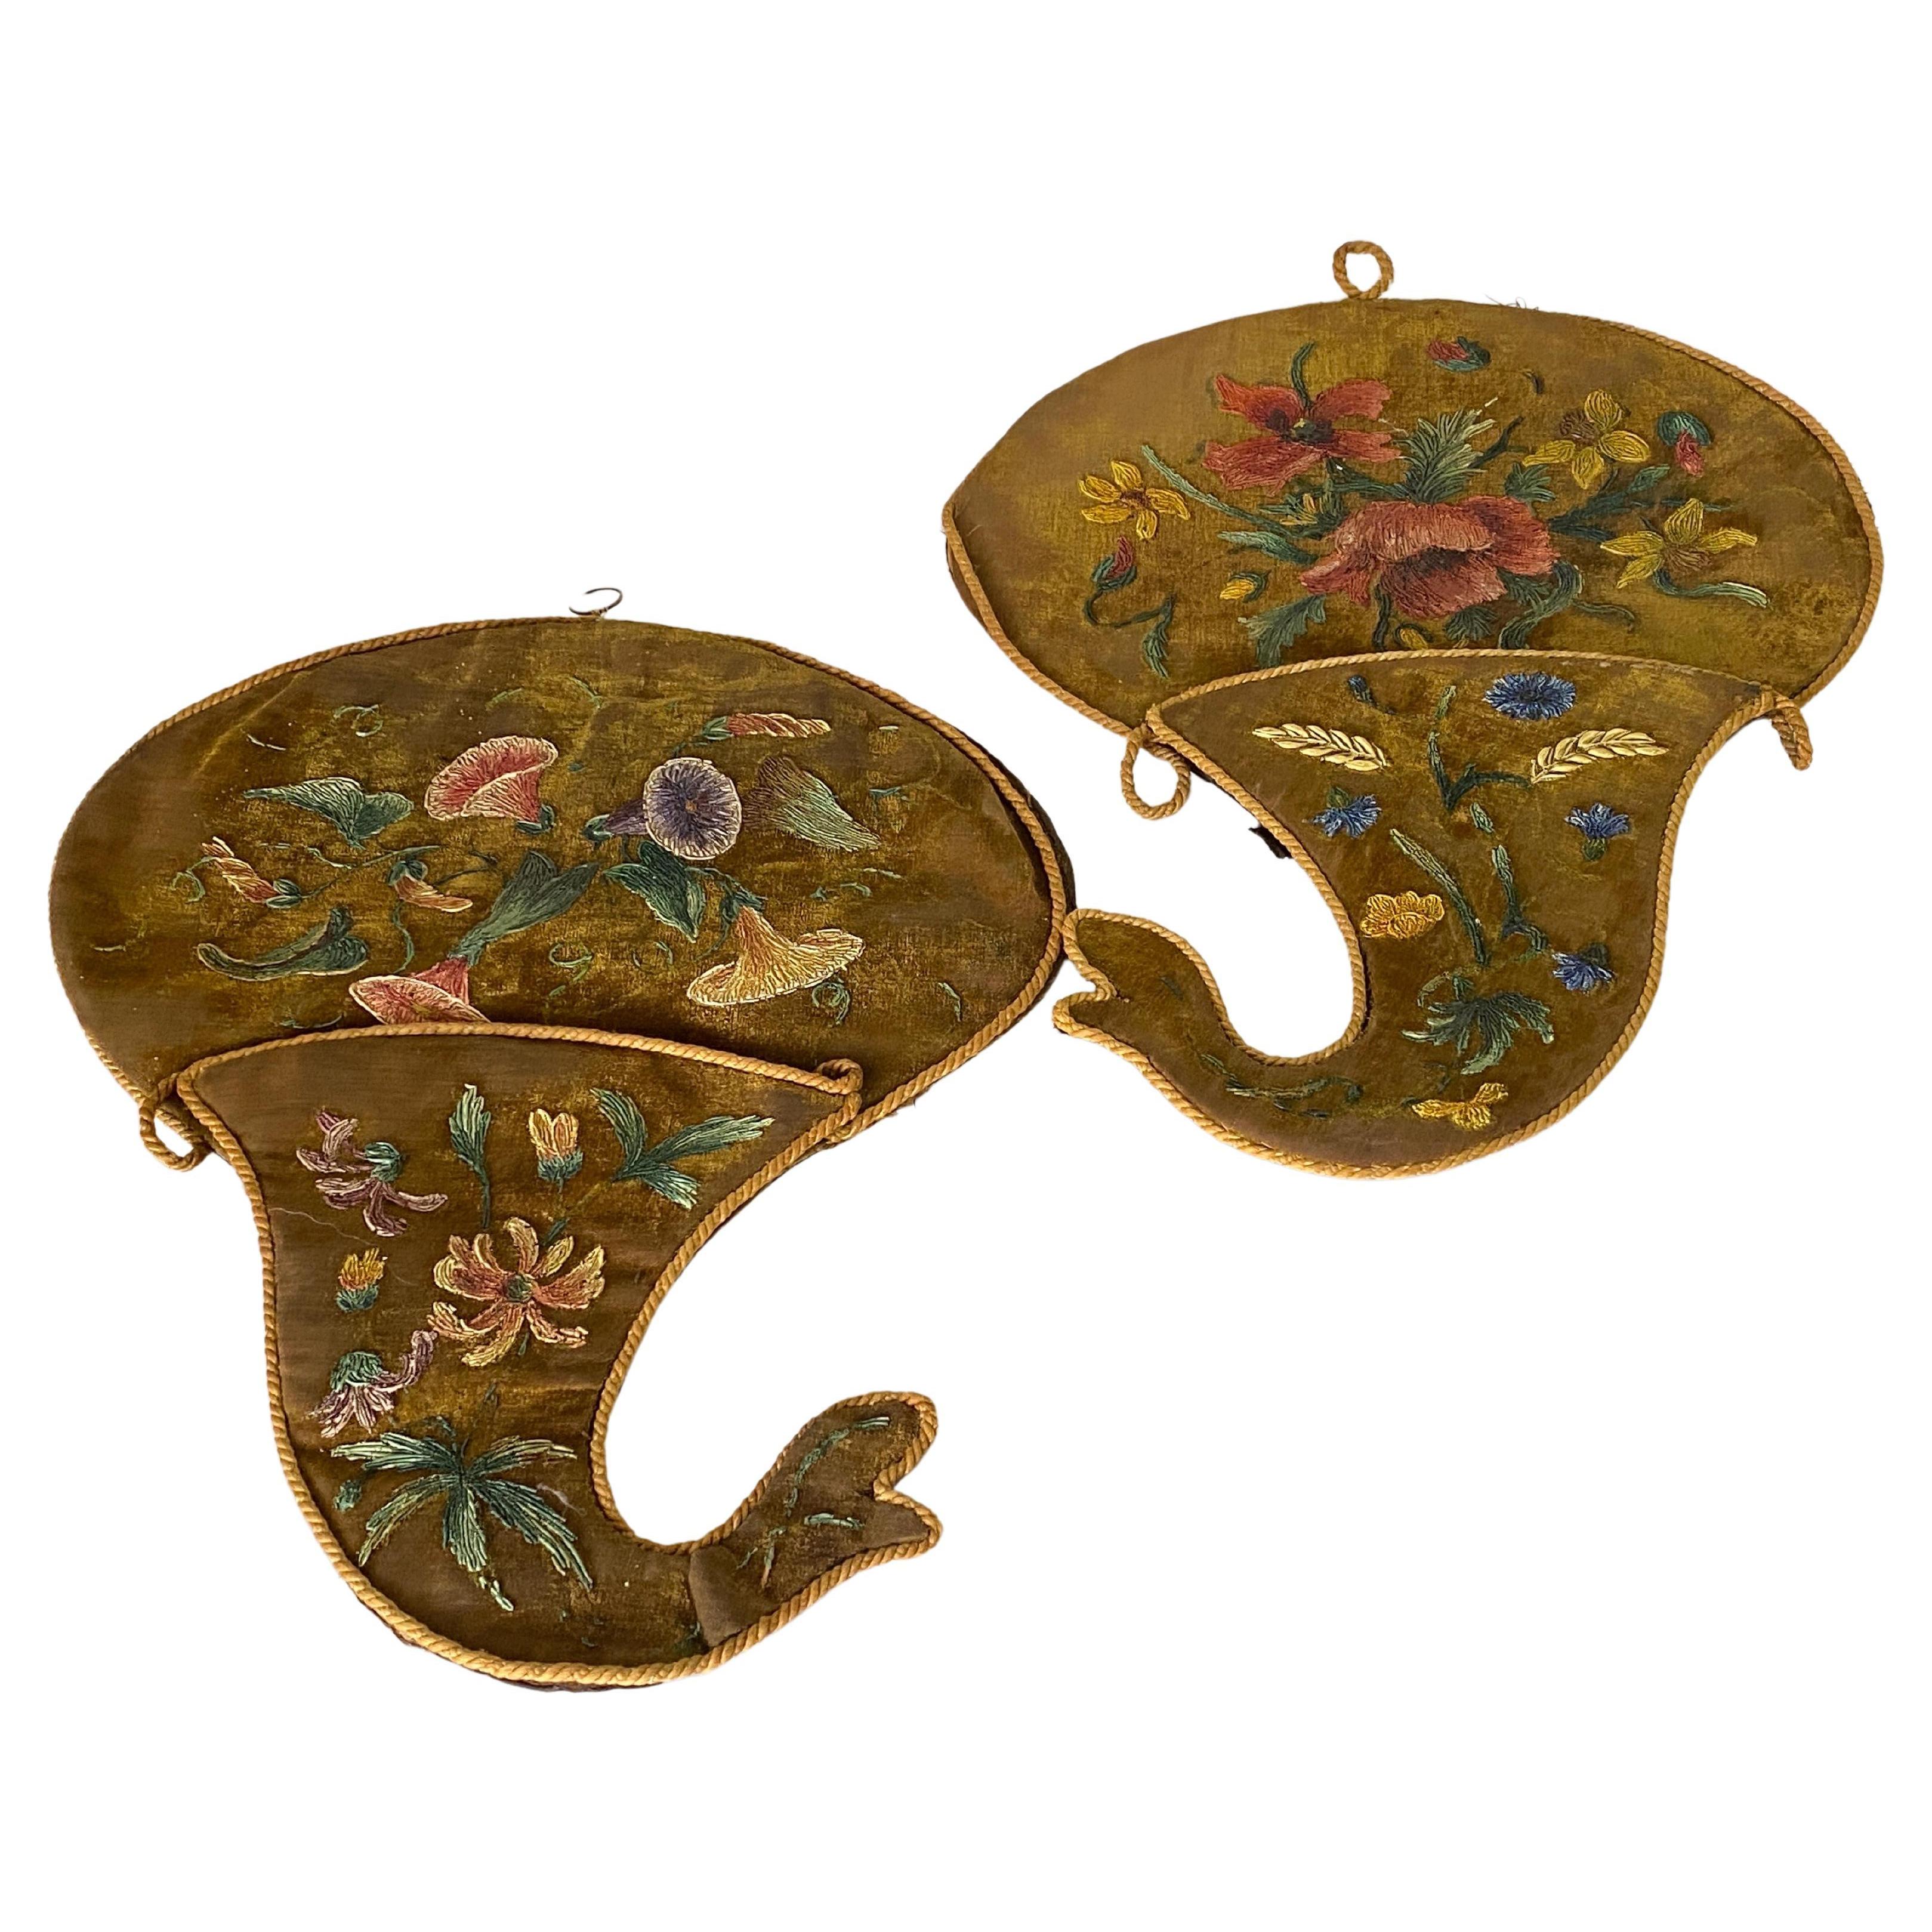 Wall Letter Holder in Embroidery on Fabric, with Floral Decorations 19th Century For Sale